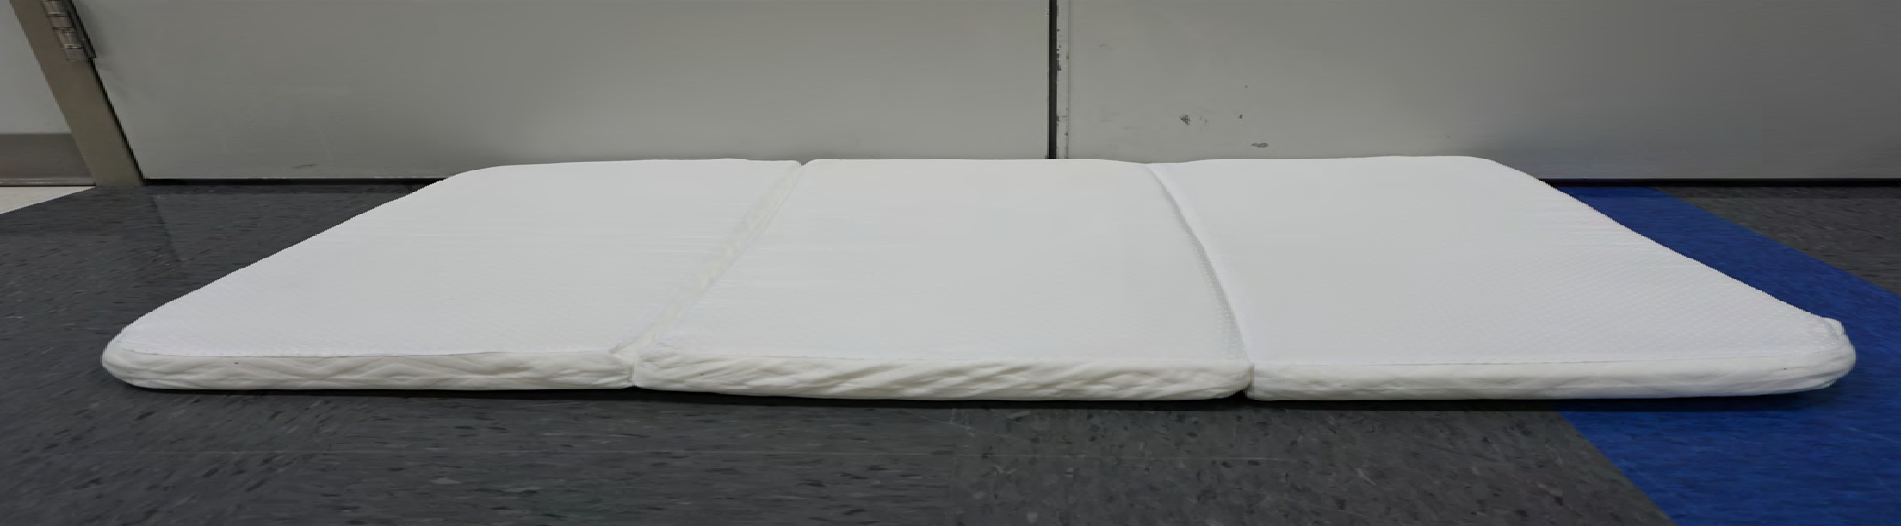 Recalled Moonsea Pack and Play Mattress